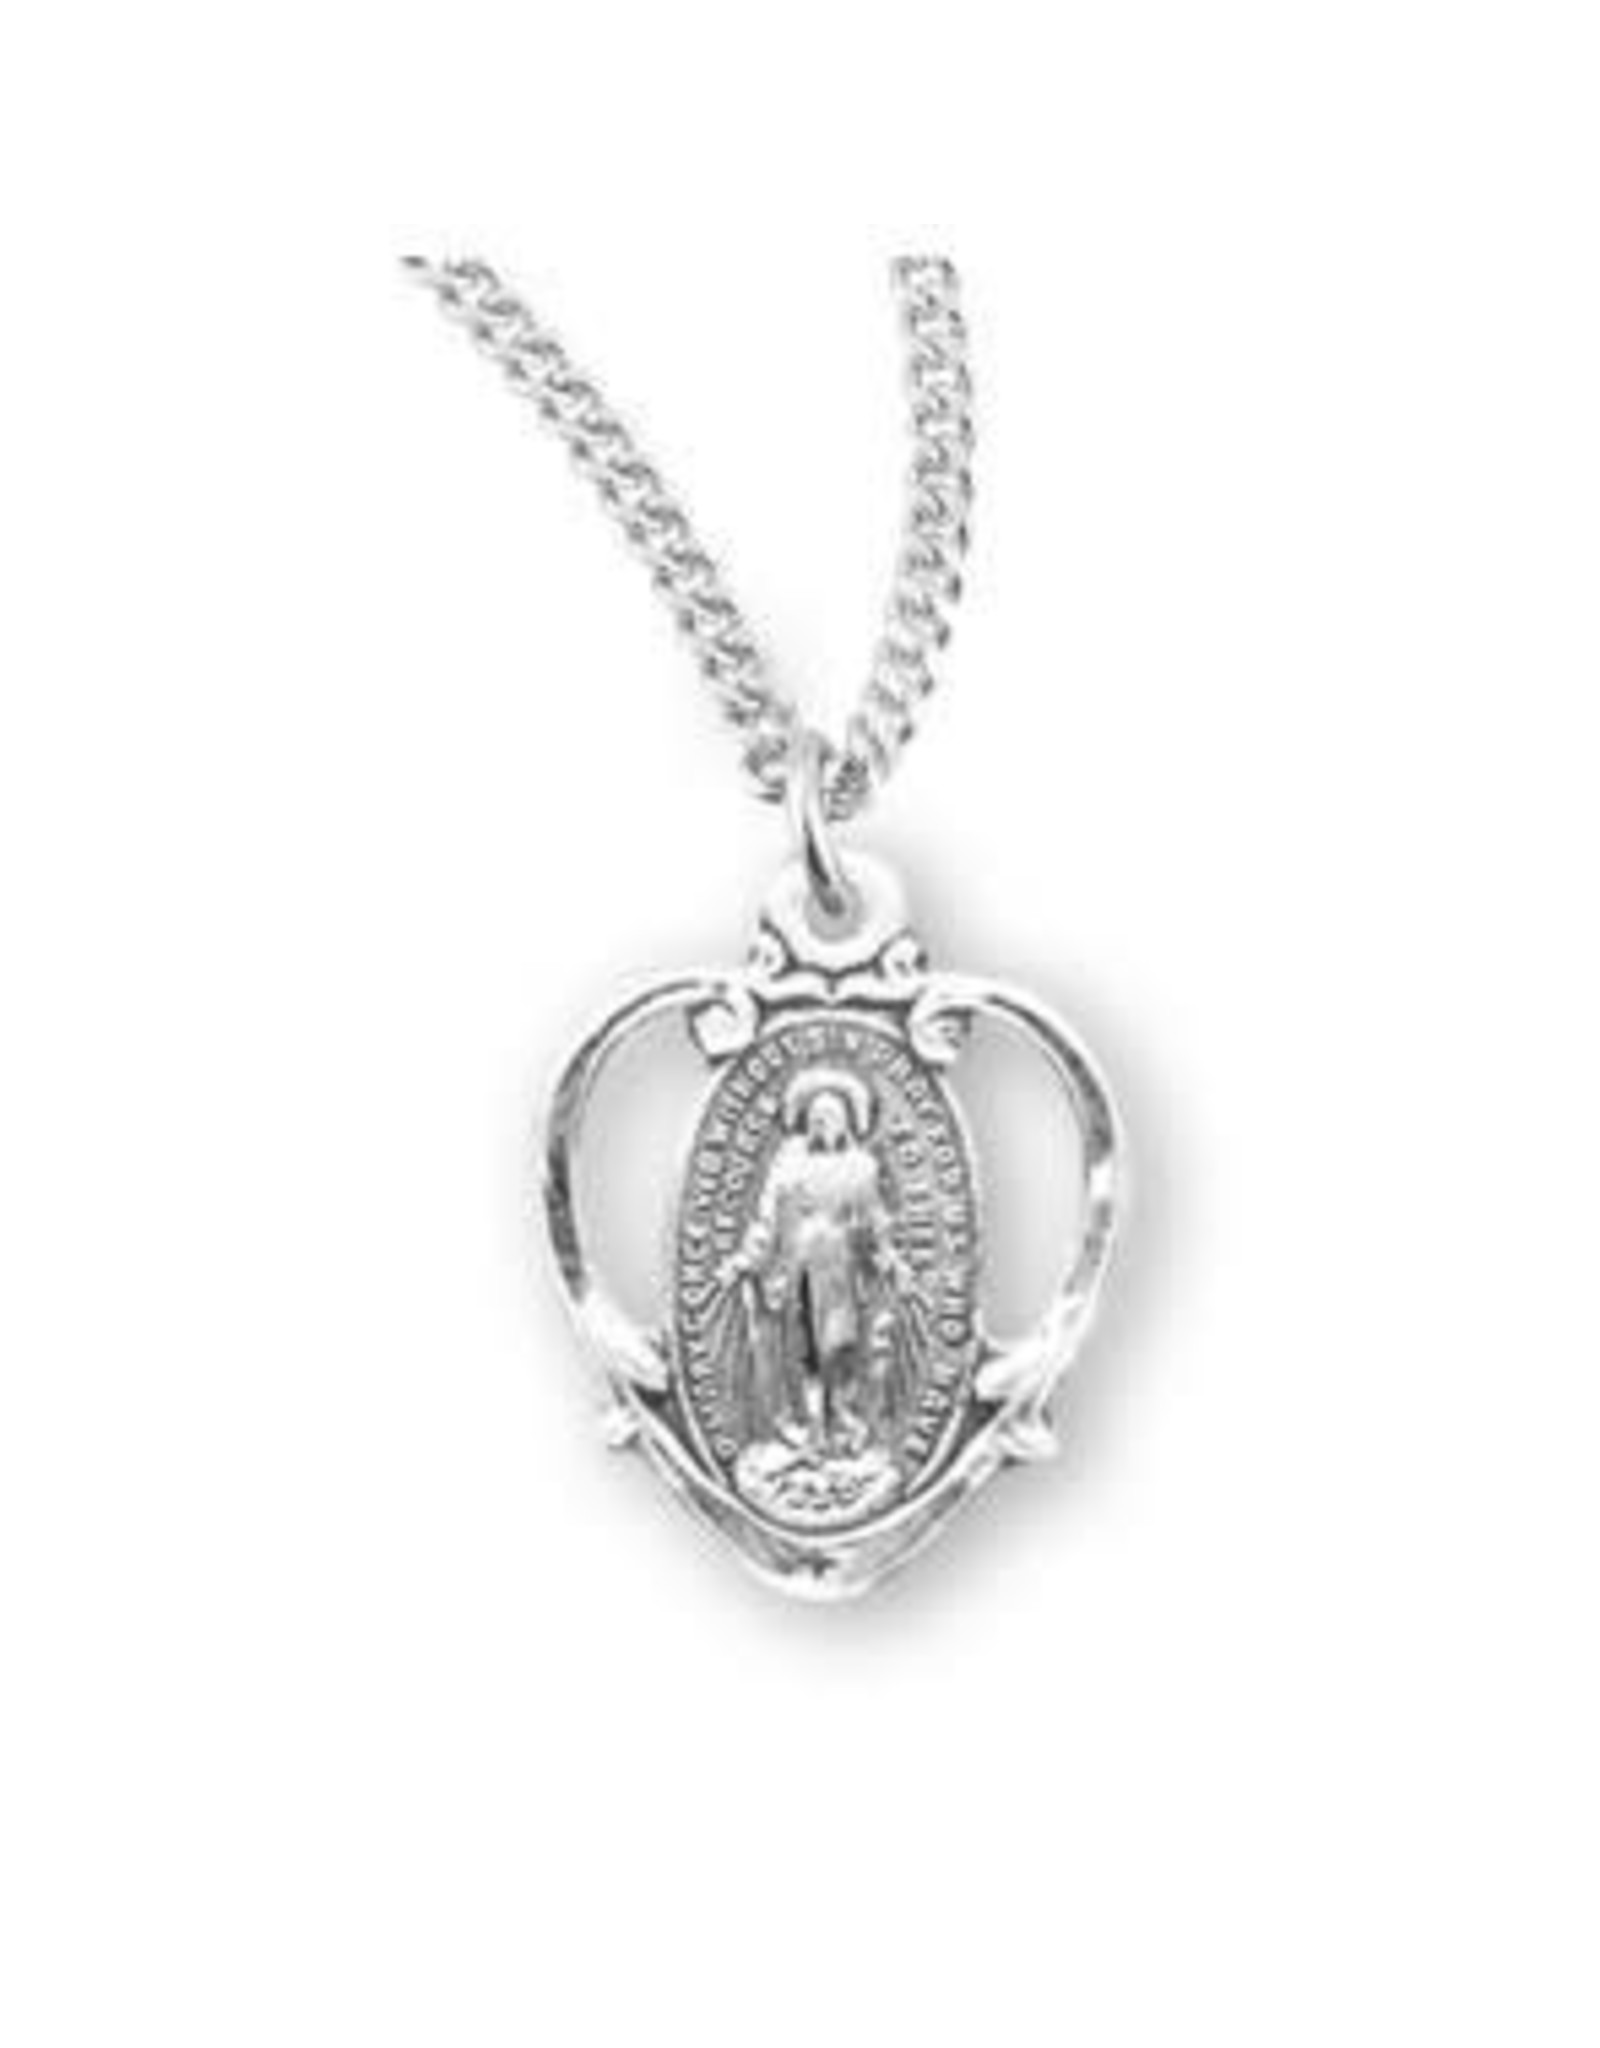 HMH Miraculous Medal, Sterling Silver, 18" Chain